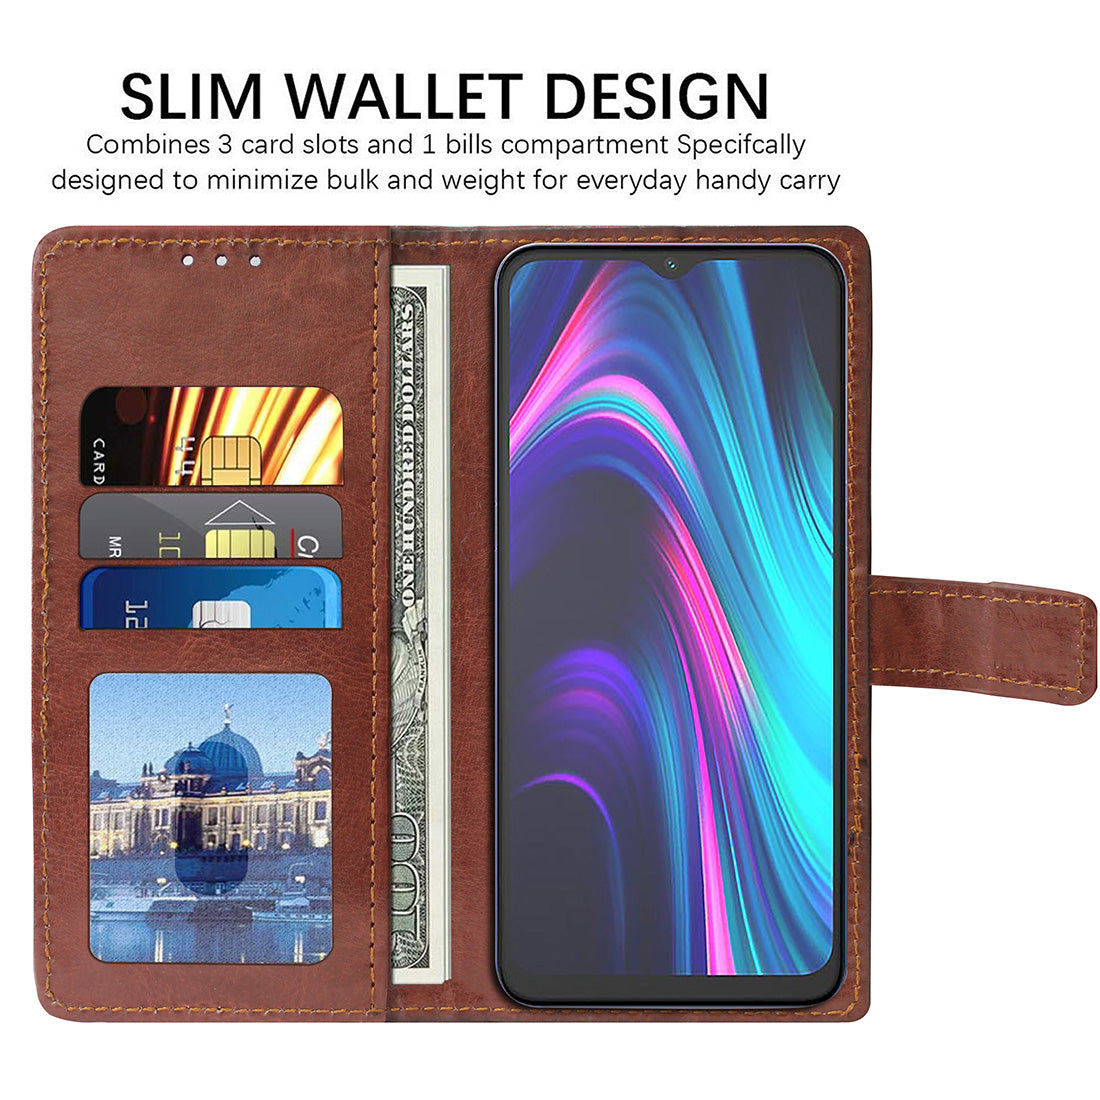 Premium Wallet Flip Cover for Micromax IN 1b 4G